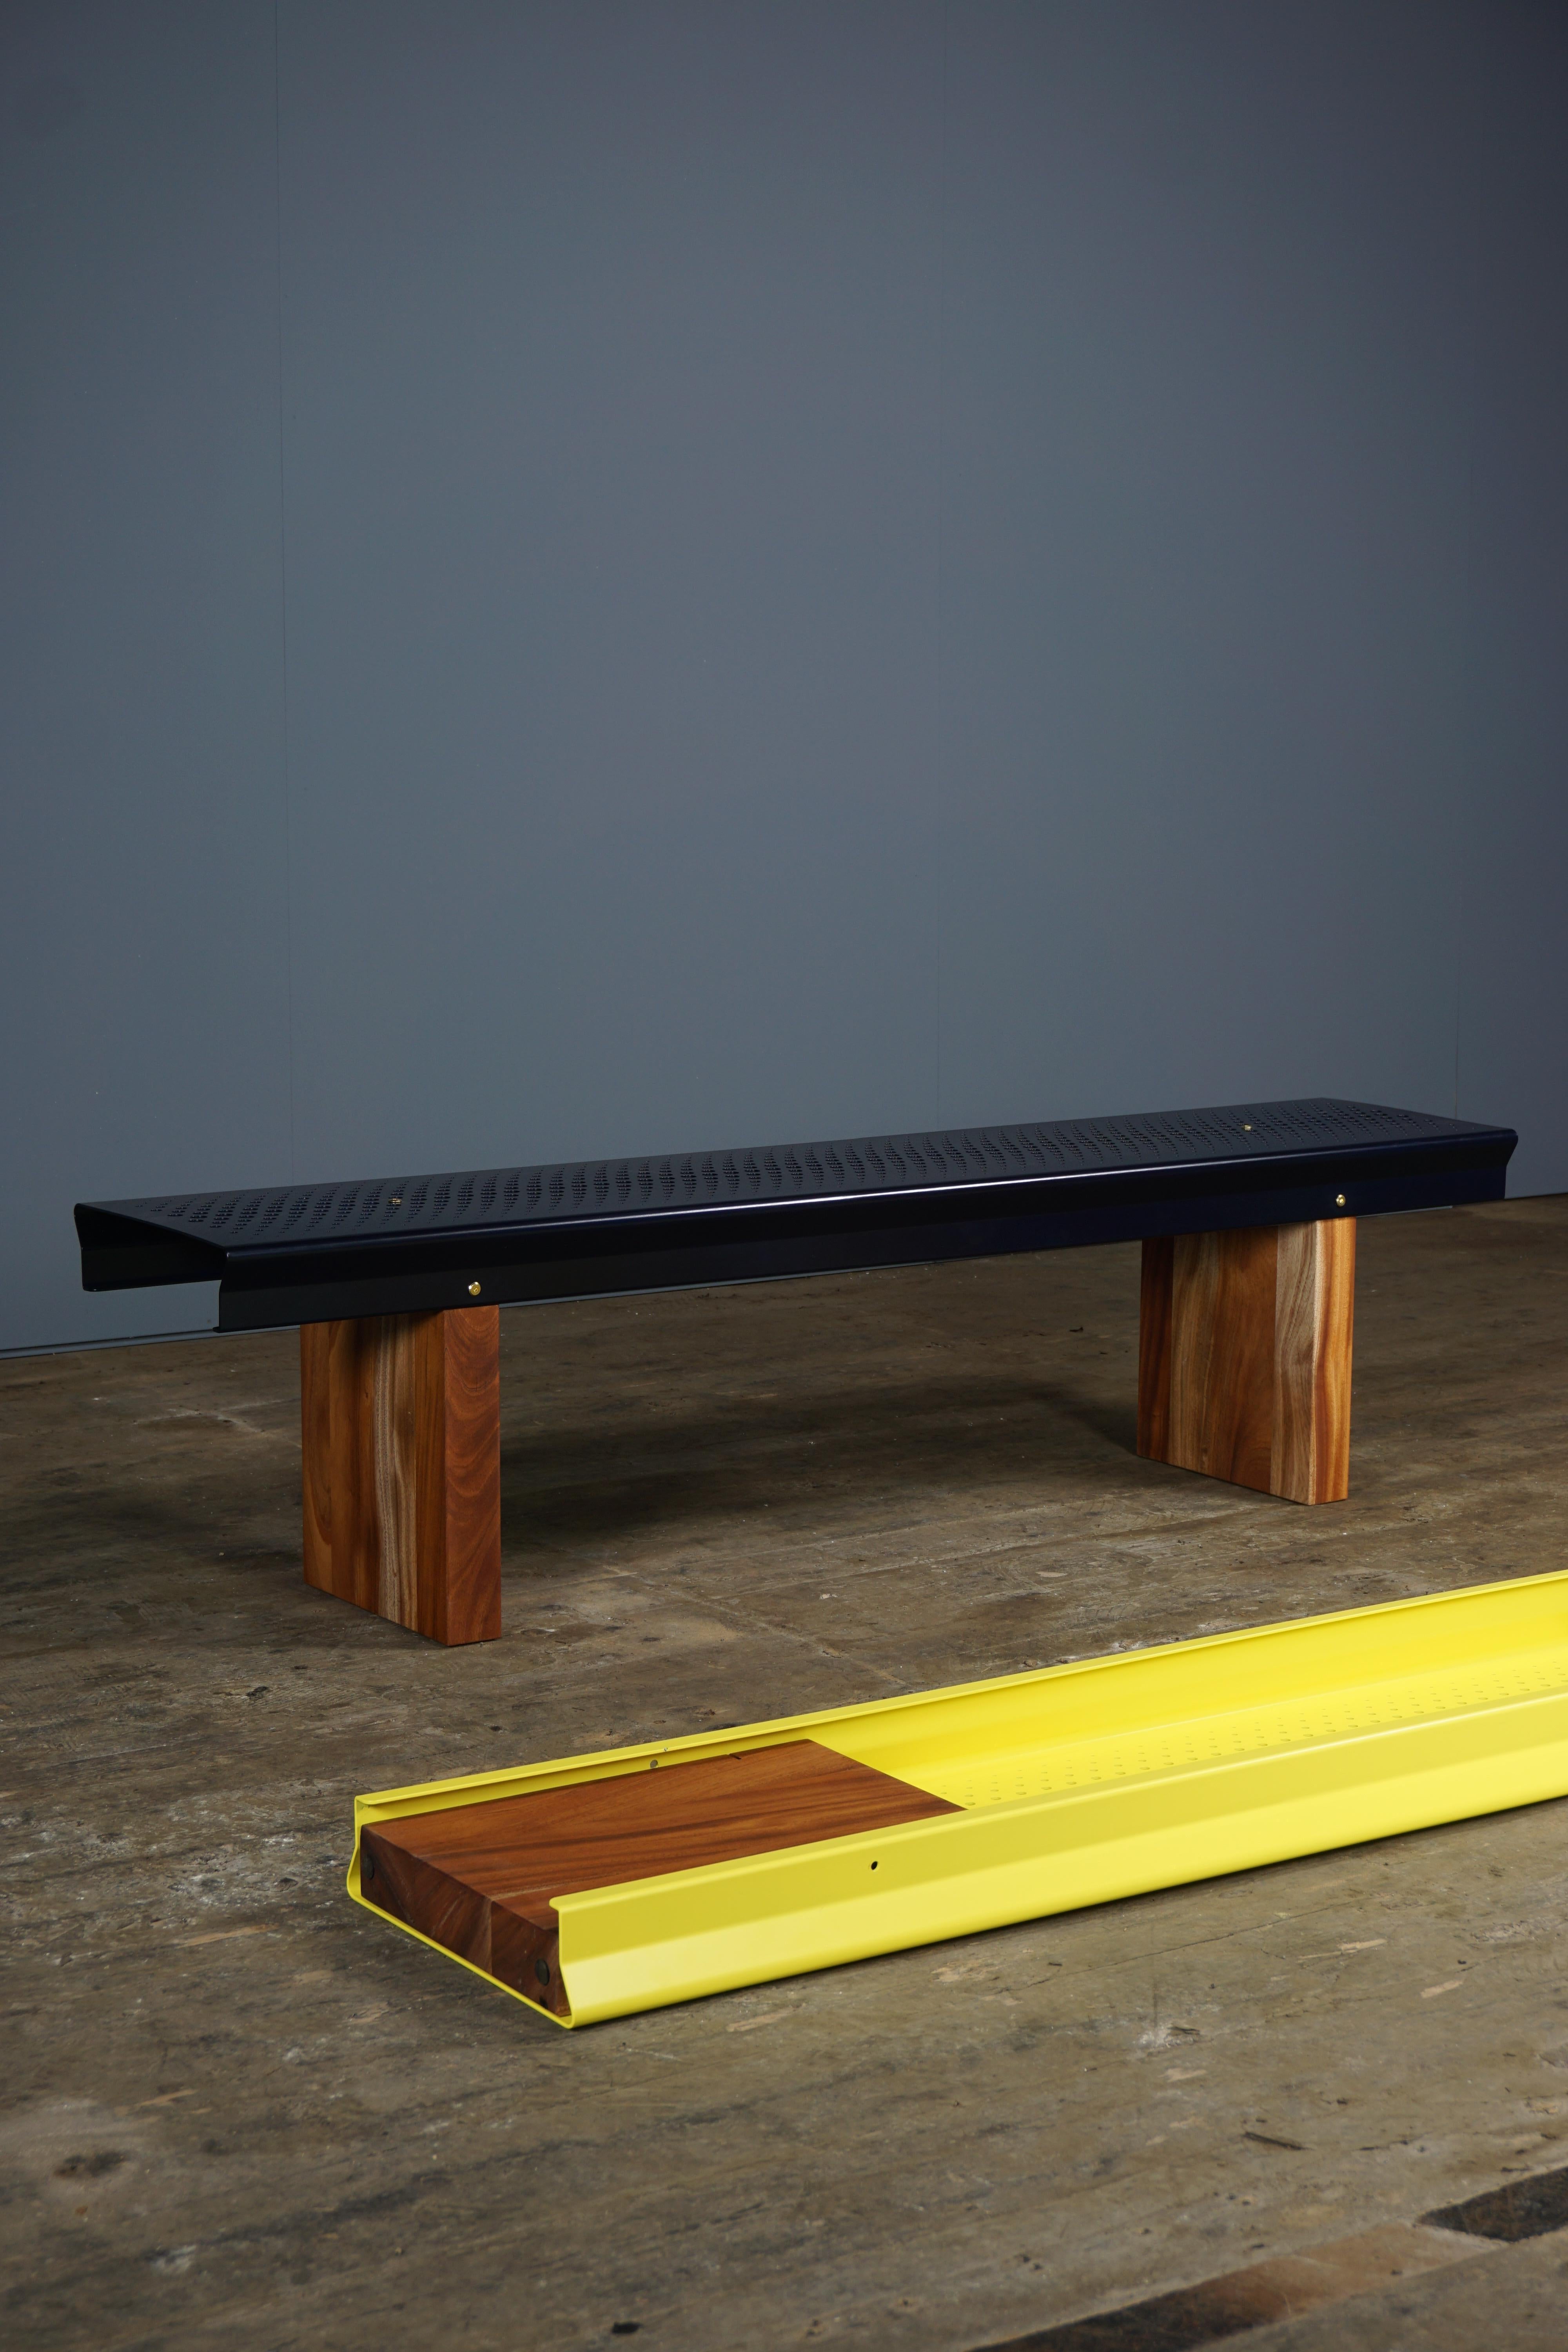 British Bench, Yellow Coated Metal, Mahogany Legs, Designed and Made by Max Frommeld For Sale